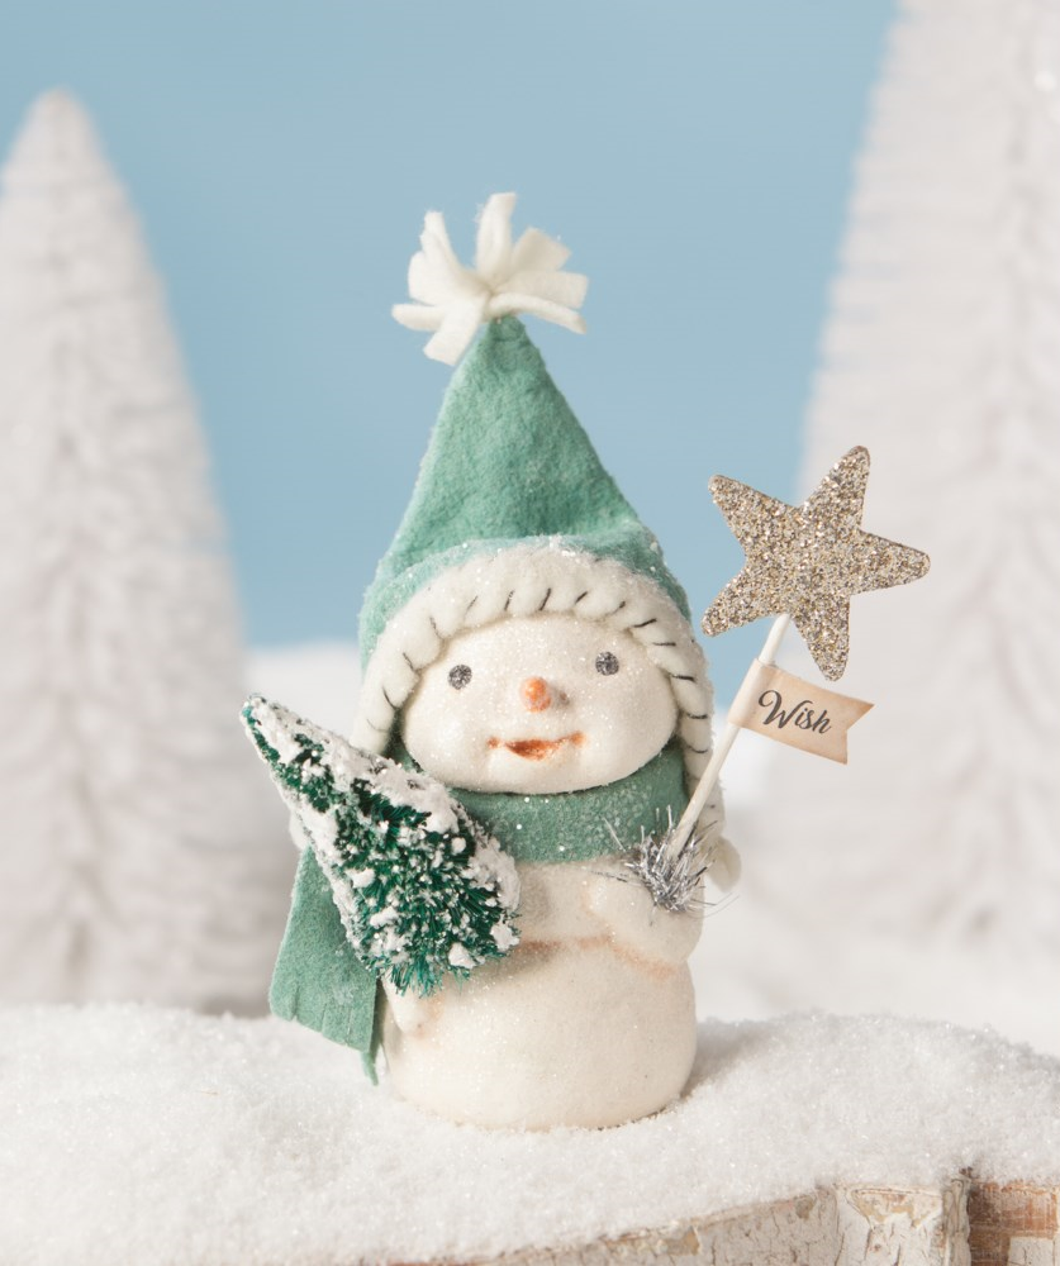 Christmas Wishes Snowman Figurine by Bethany Lowe Designs